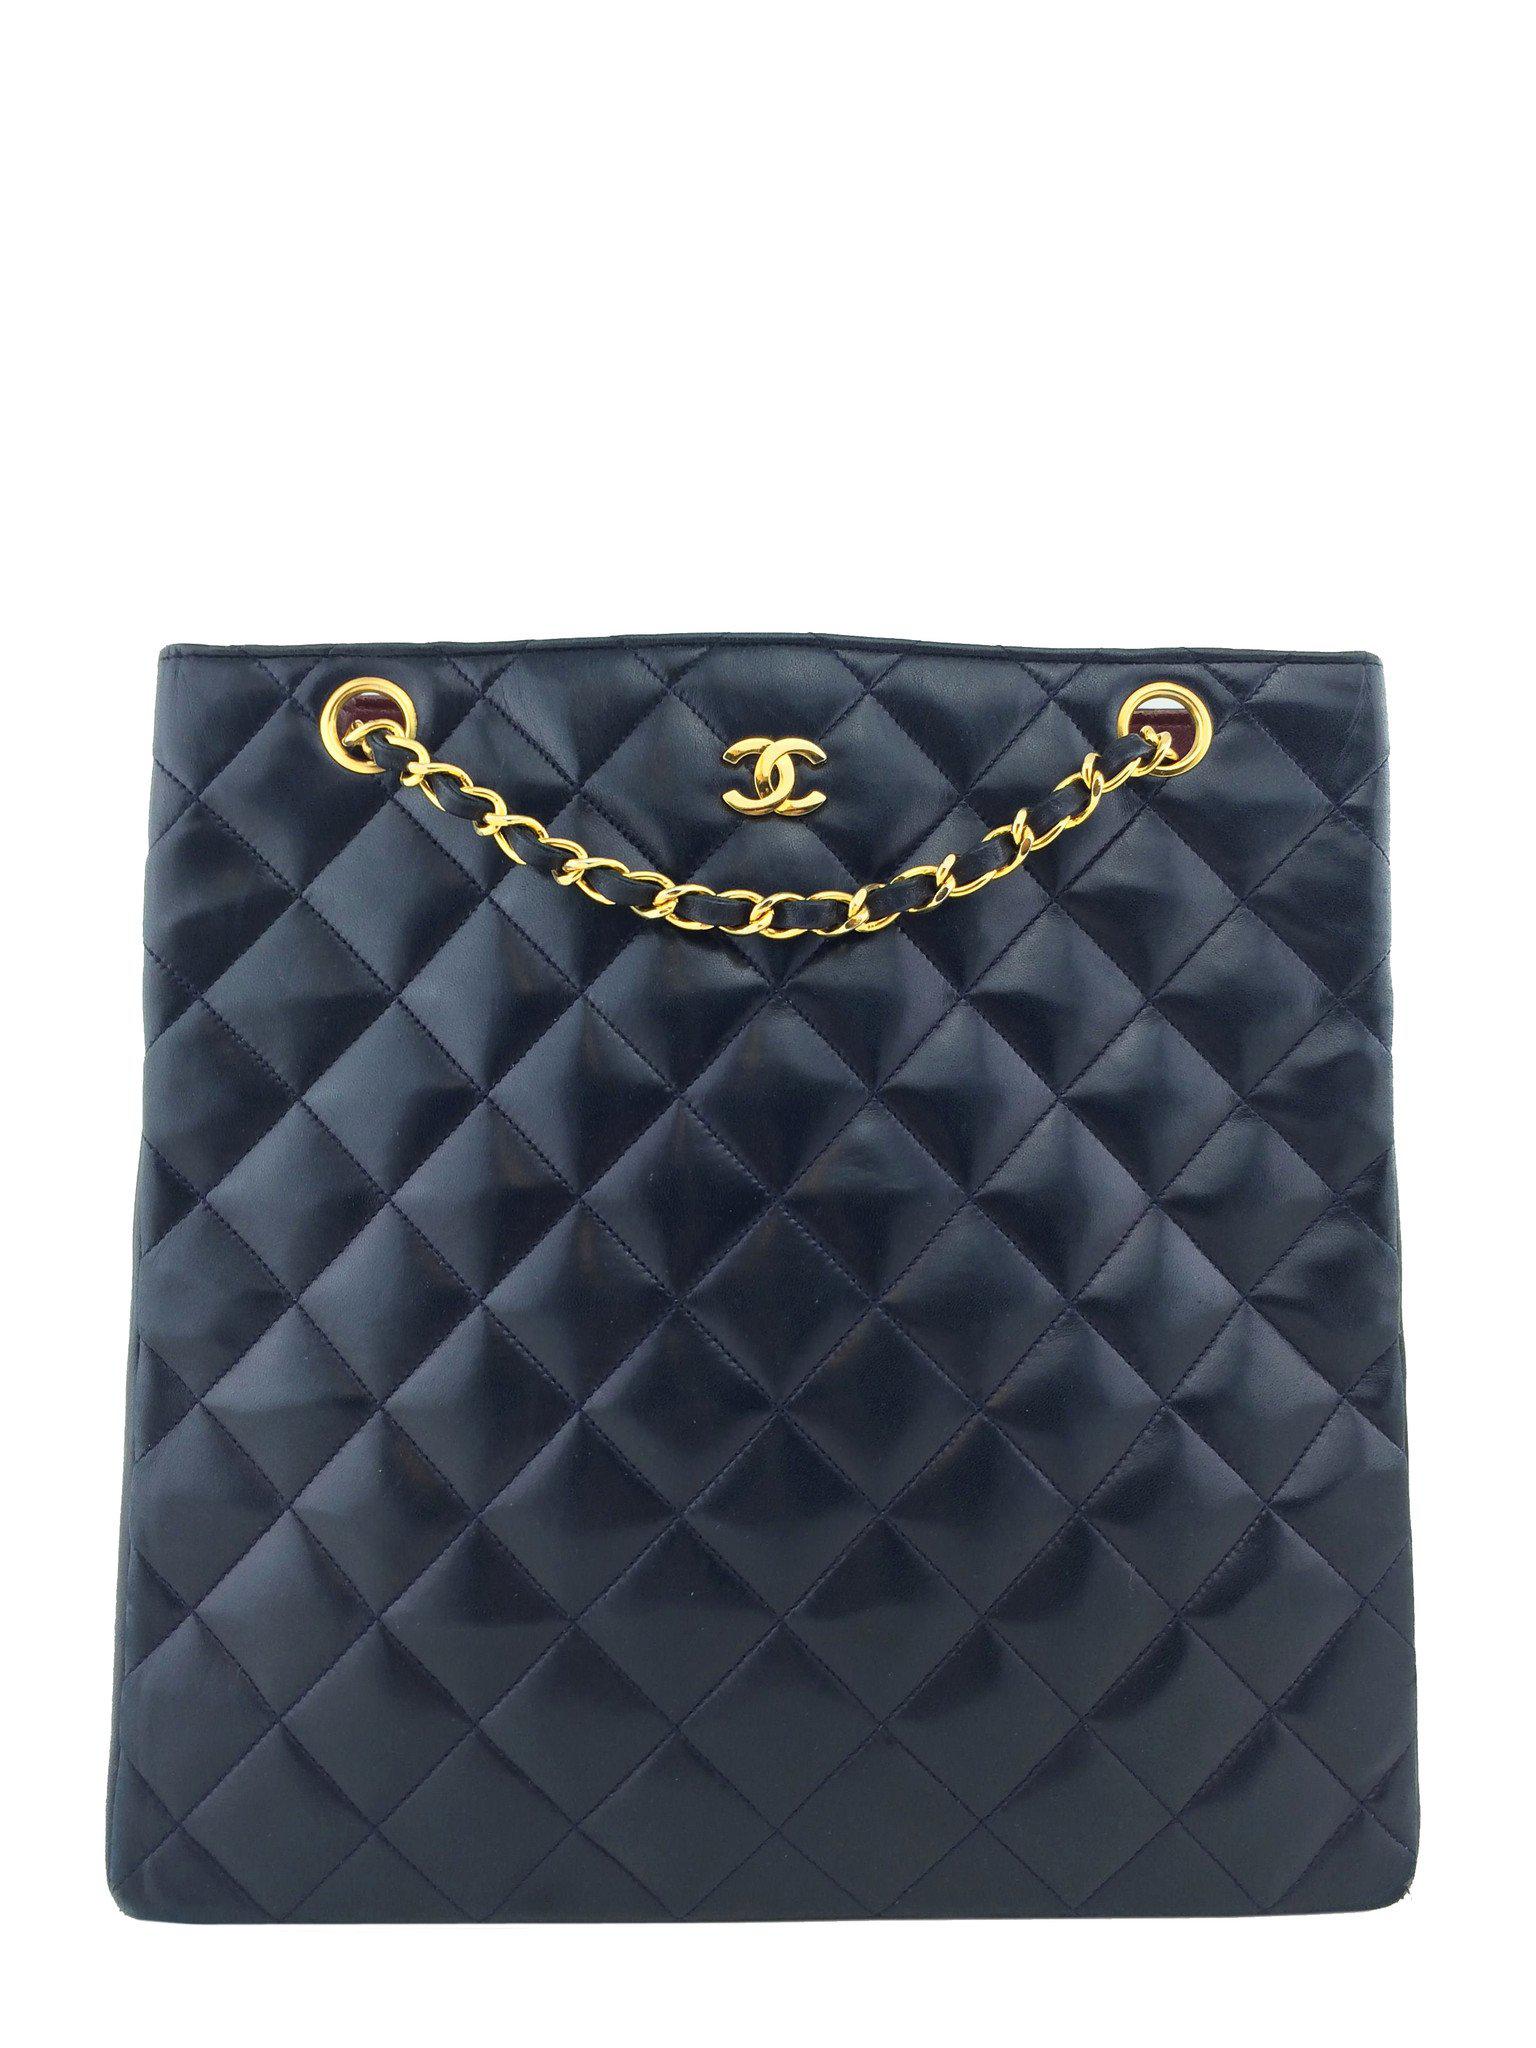 Chanel Vintage Quilted Lambskin Medium Shopper Tote Bag